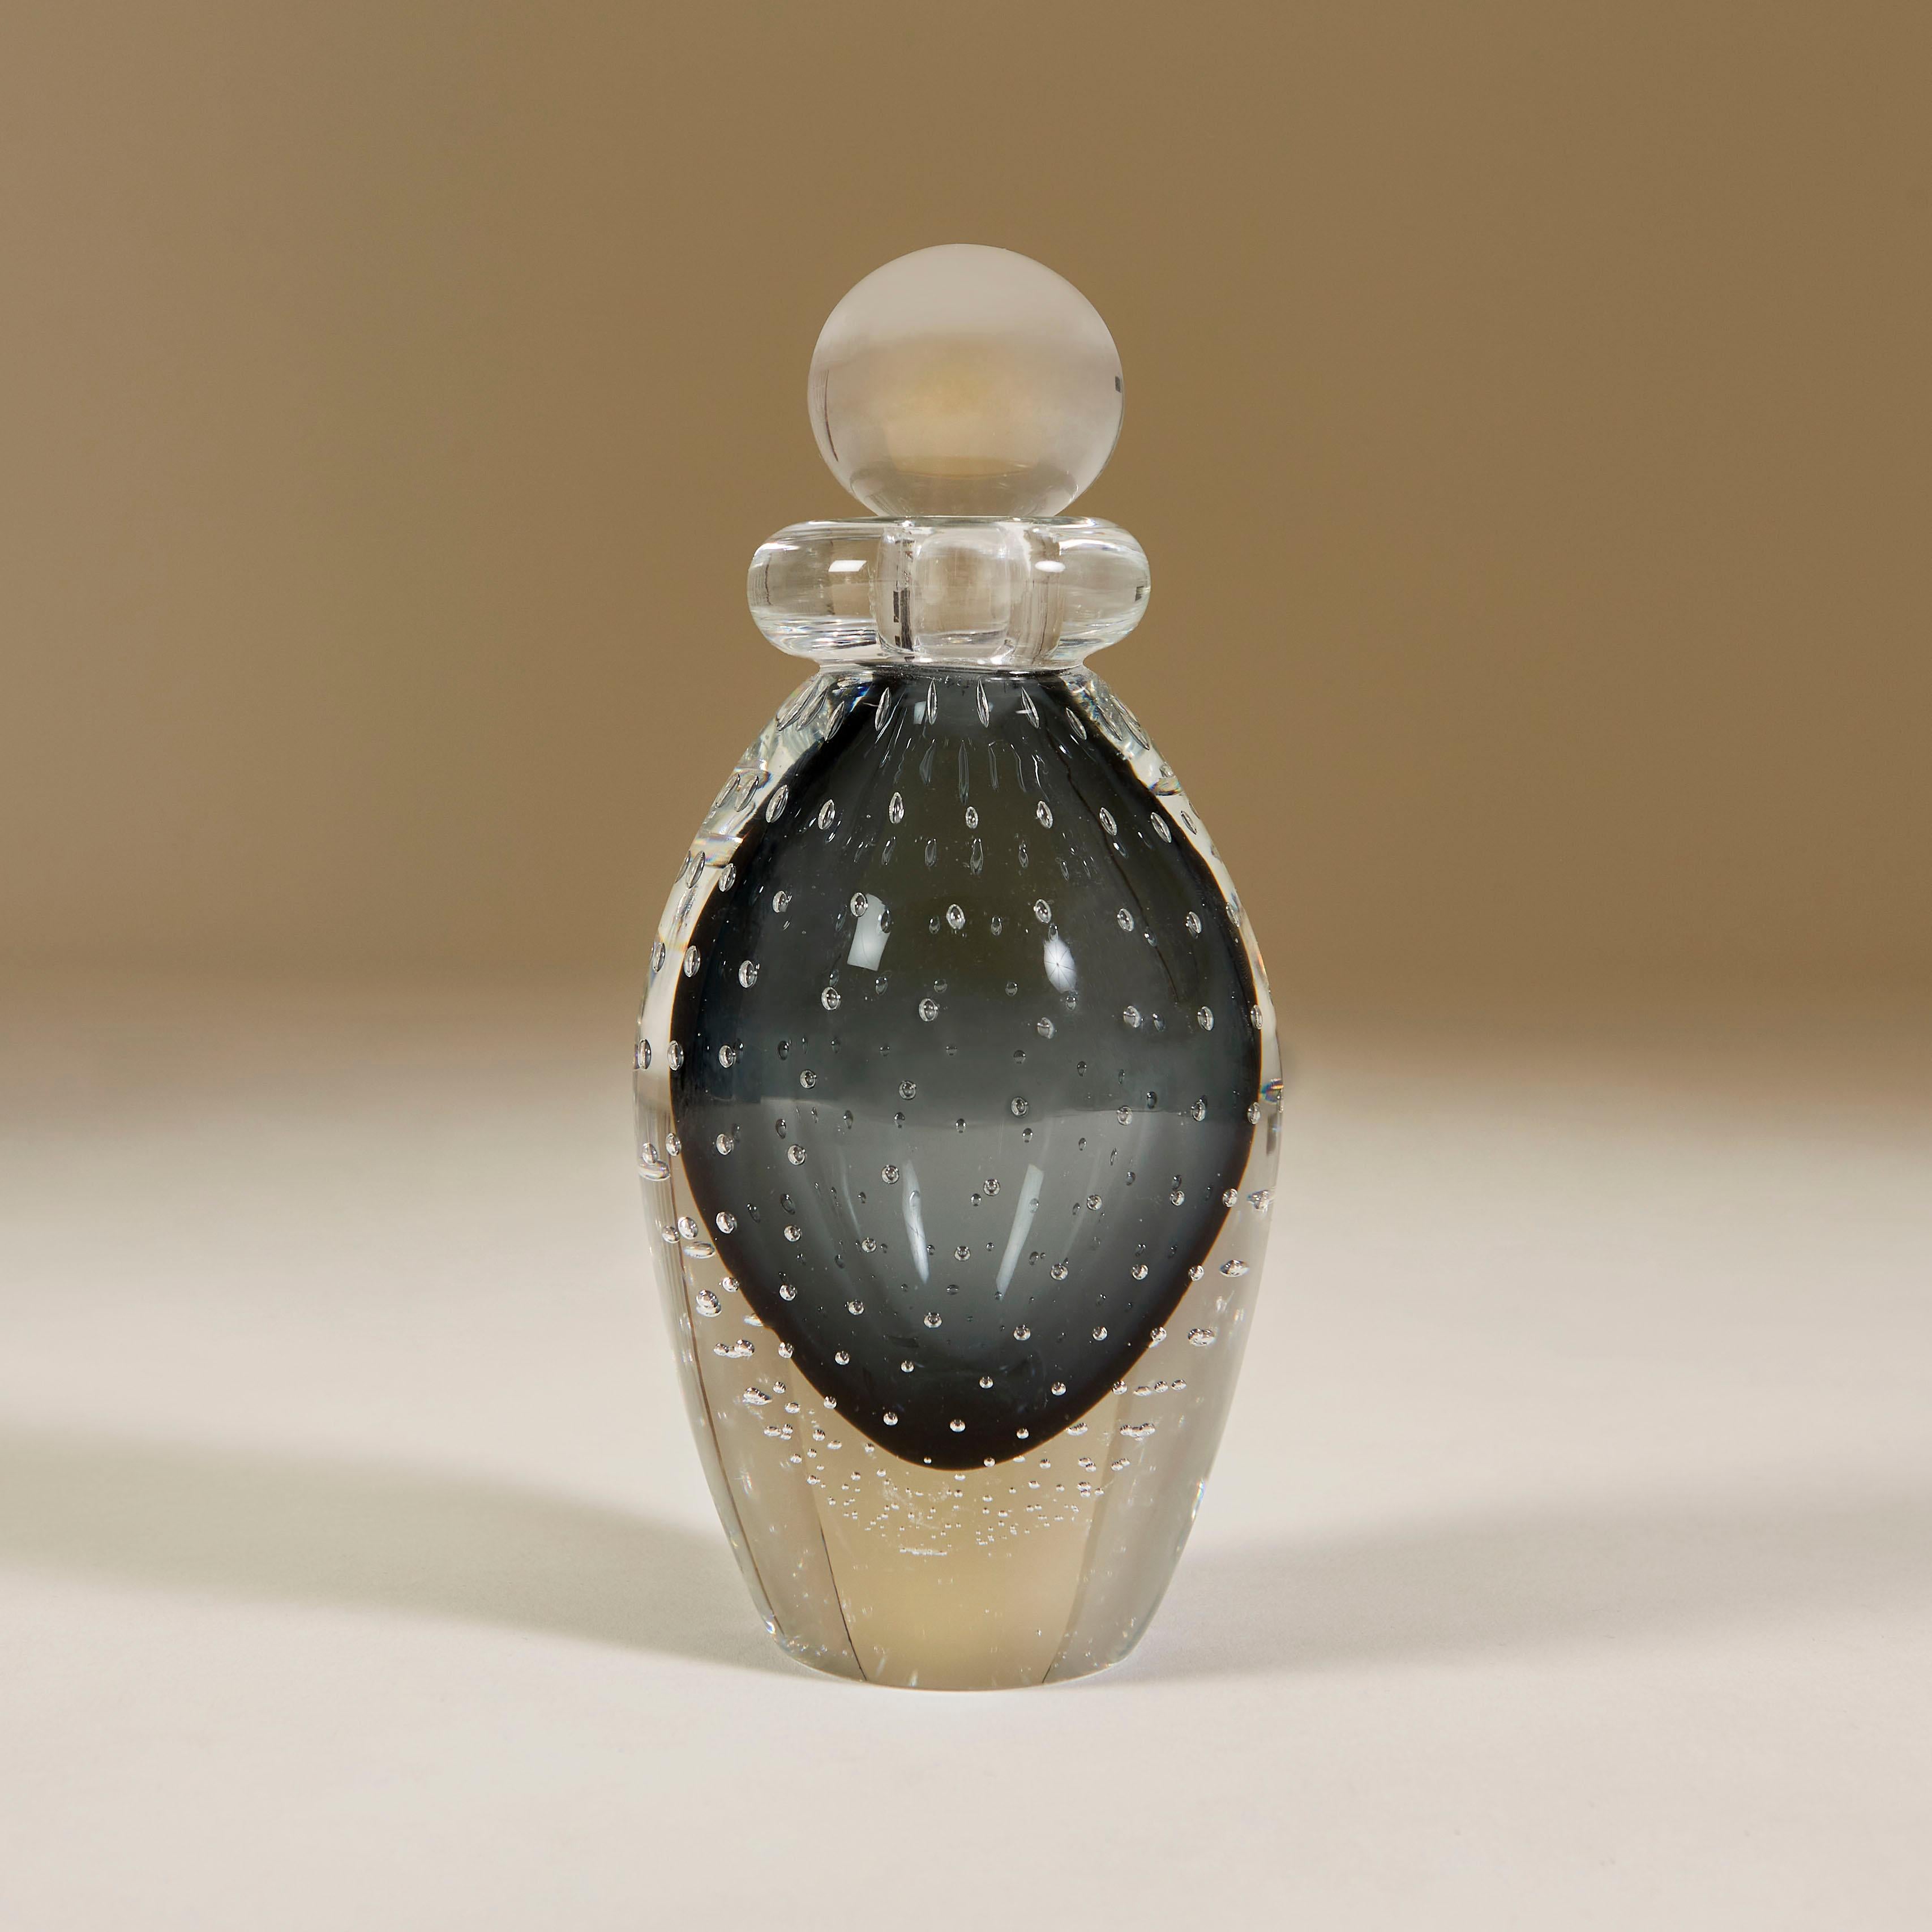 Grey / black red Bullicante tall perfume bottle cased in clear Murano glass with clear glass collar and ball stopper. 
Made famous in the 1930s by Archimede Seguso, the Bullicante controlled bubbles technique involves overlaying several layer of